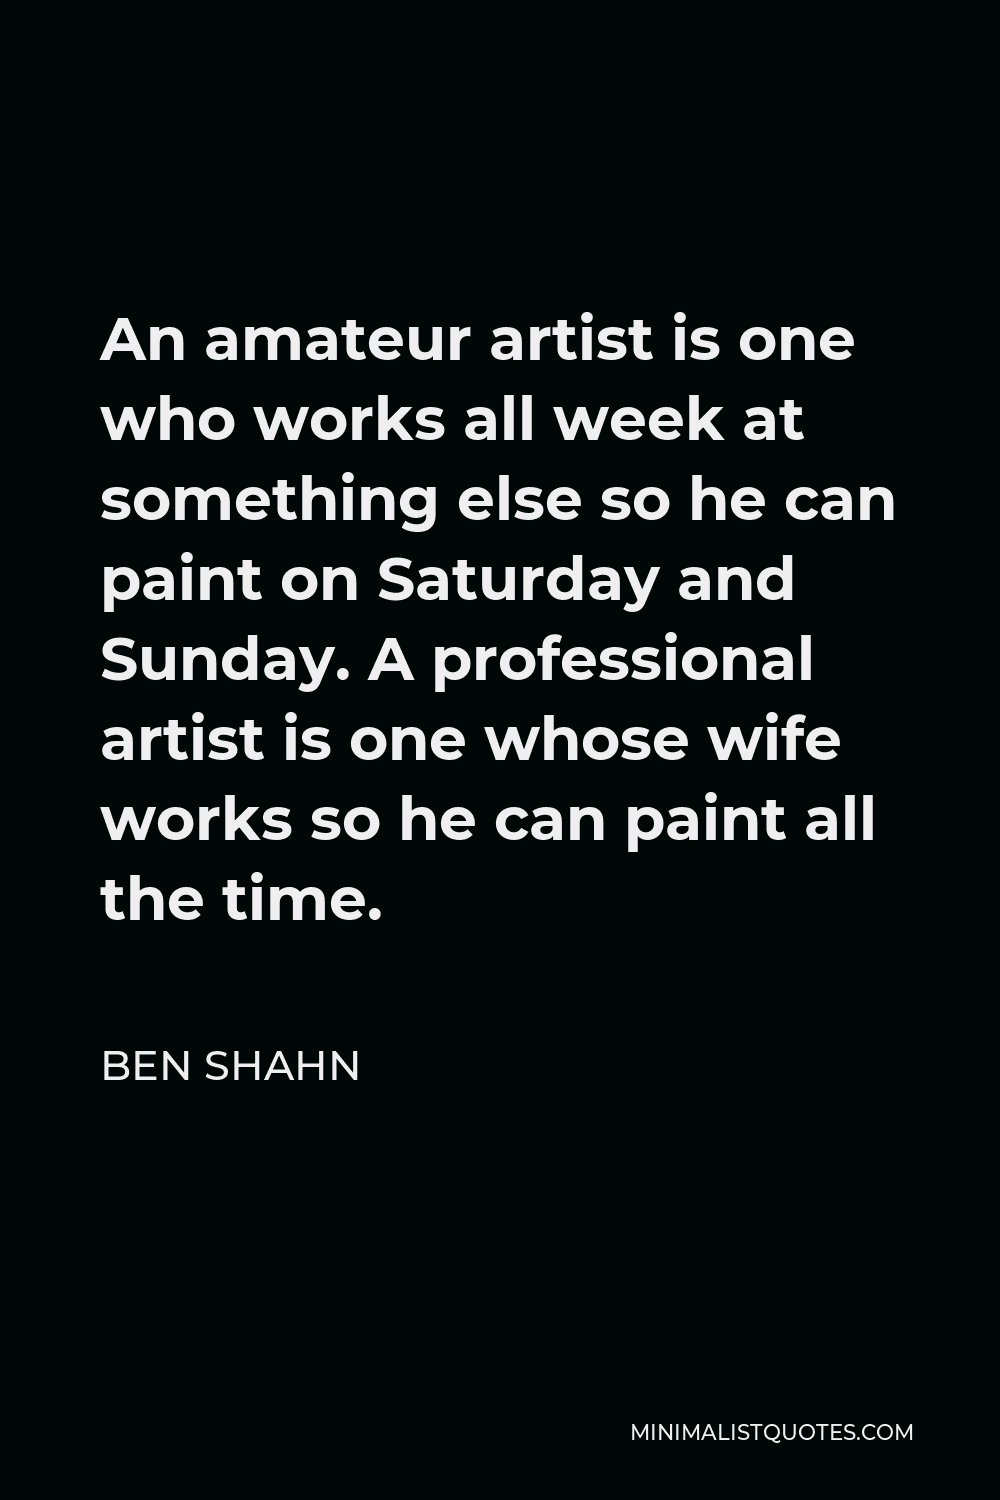 Ben Shahn Quote - An amateur artist is one who works all week at something else so he can paint on Saturday and Sunday. A professional artist is one whose wife works so he can paint all the time.